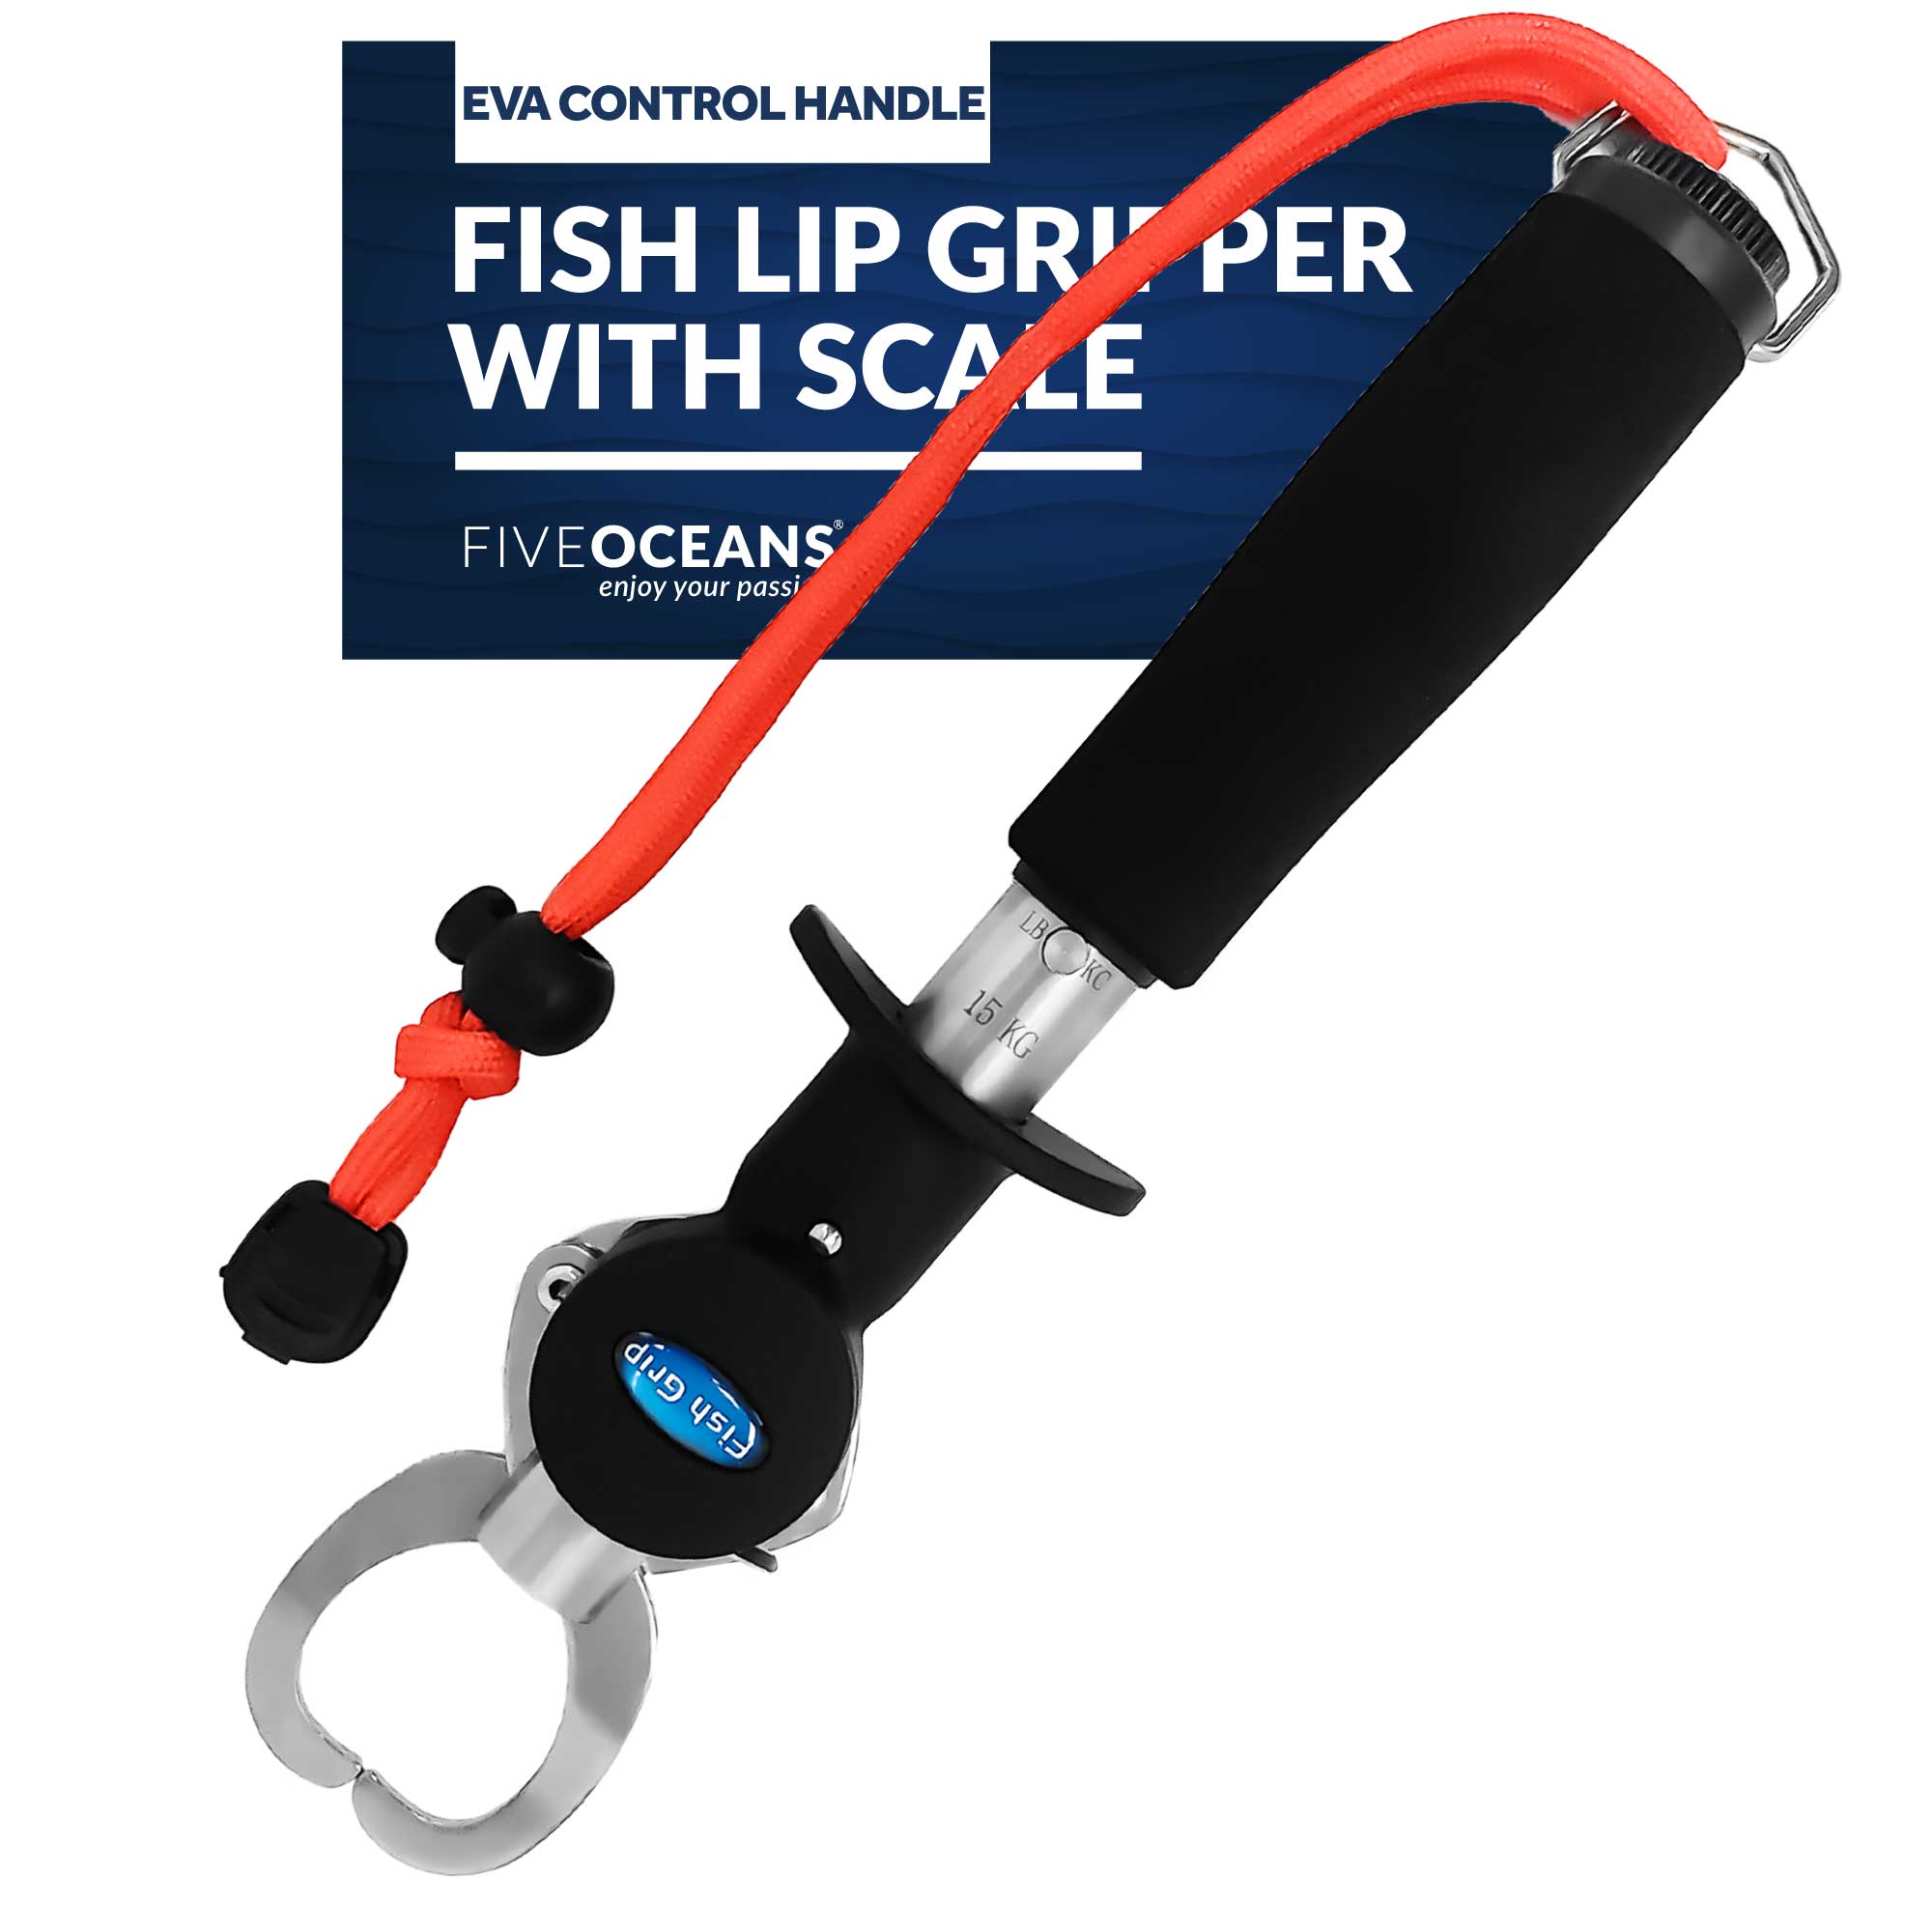 Stainless Steel Fish Lip Gripper with Scale and EVA Control Handle - F